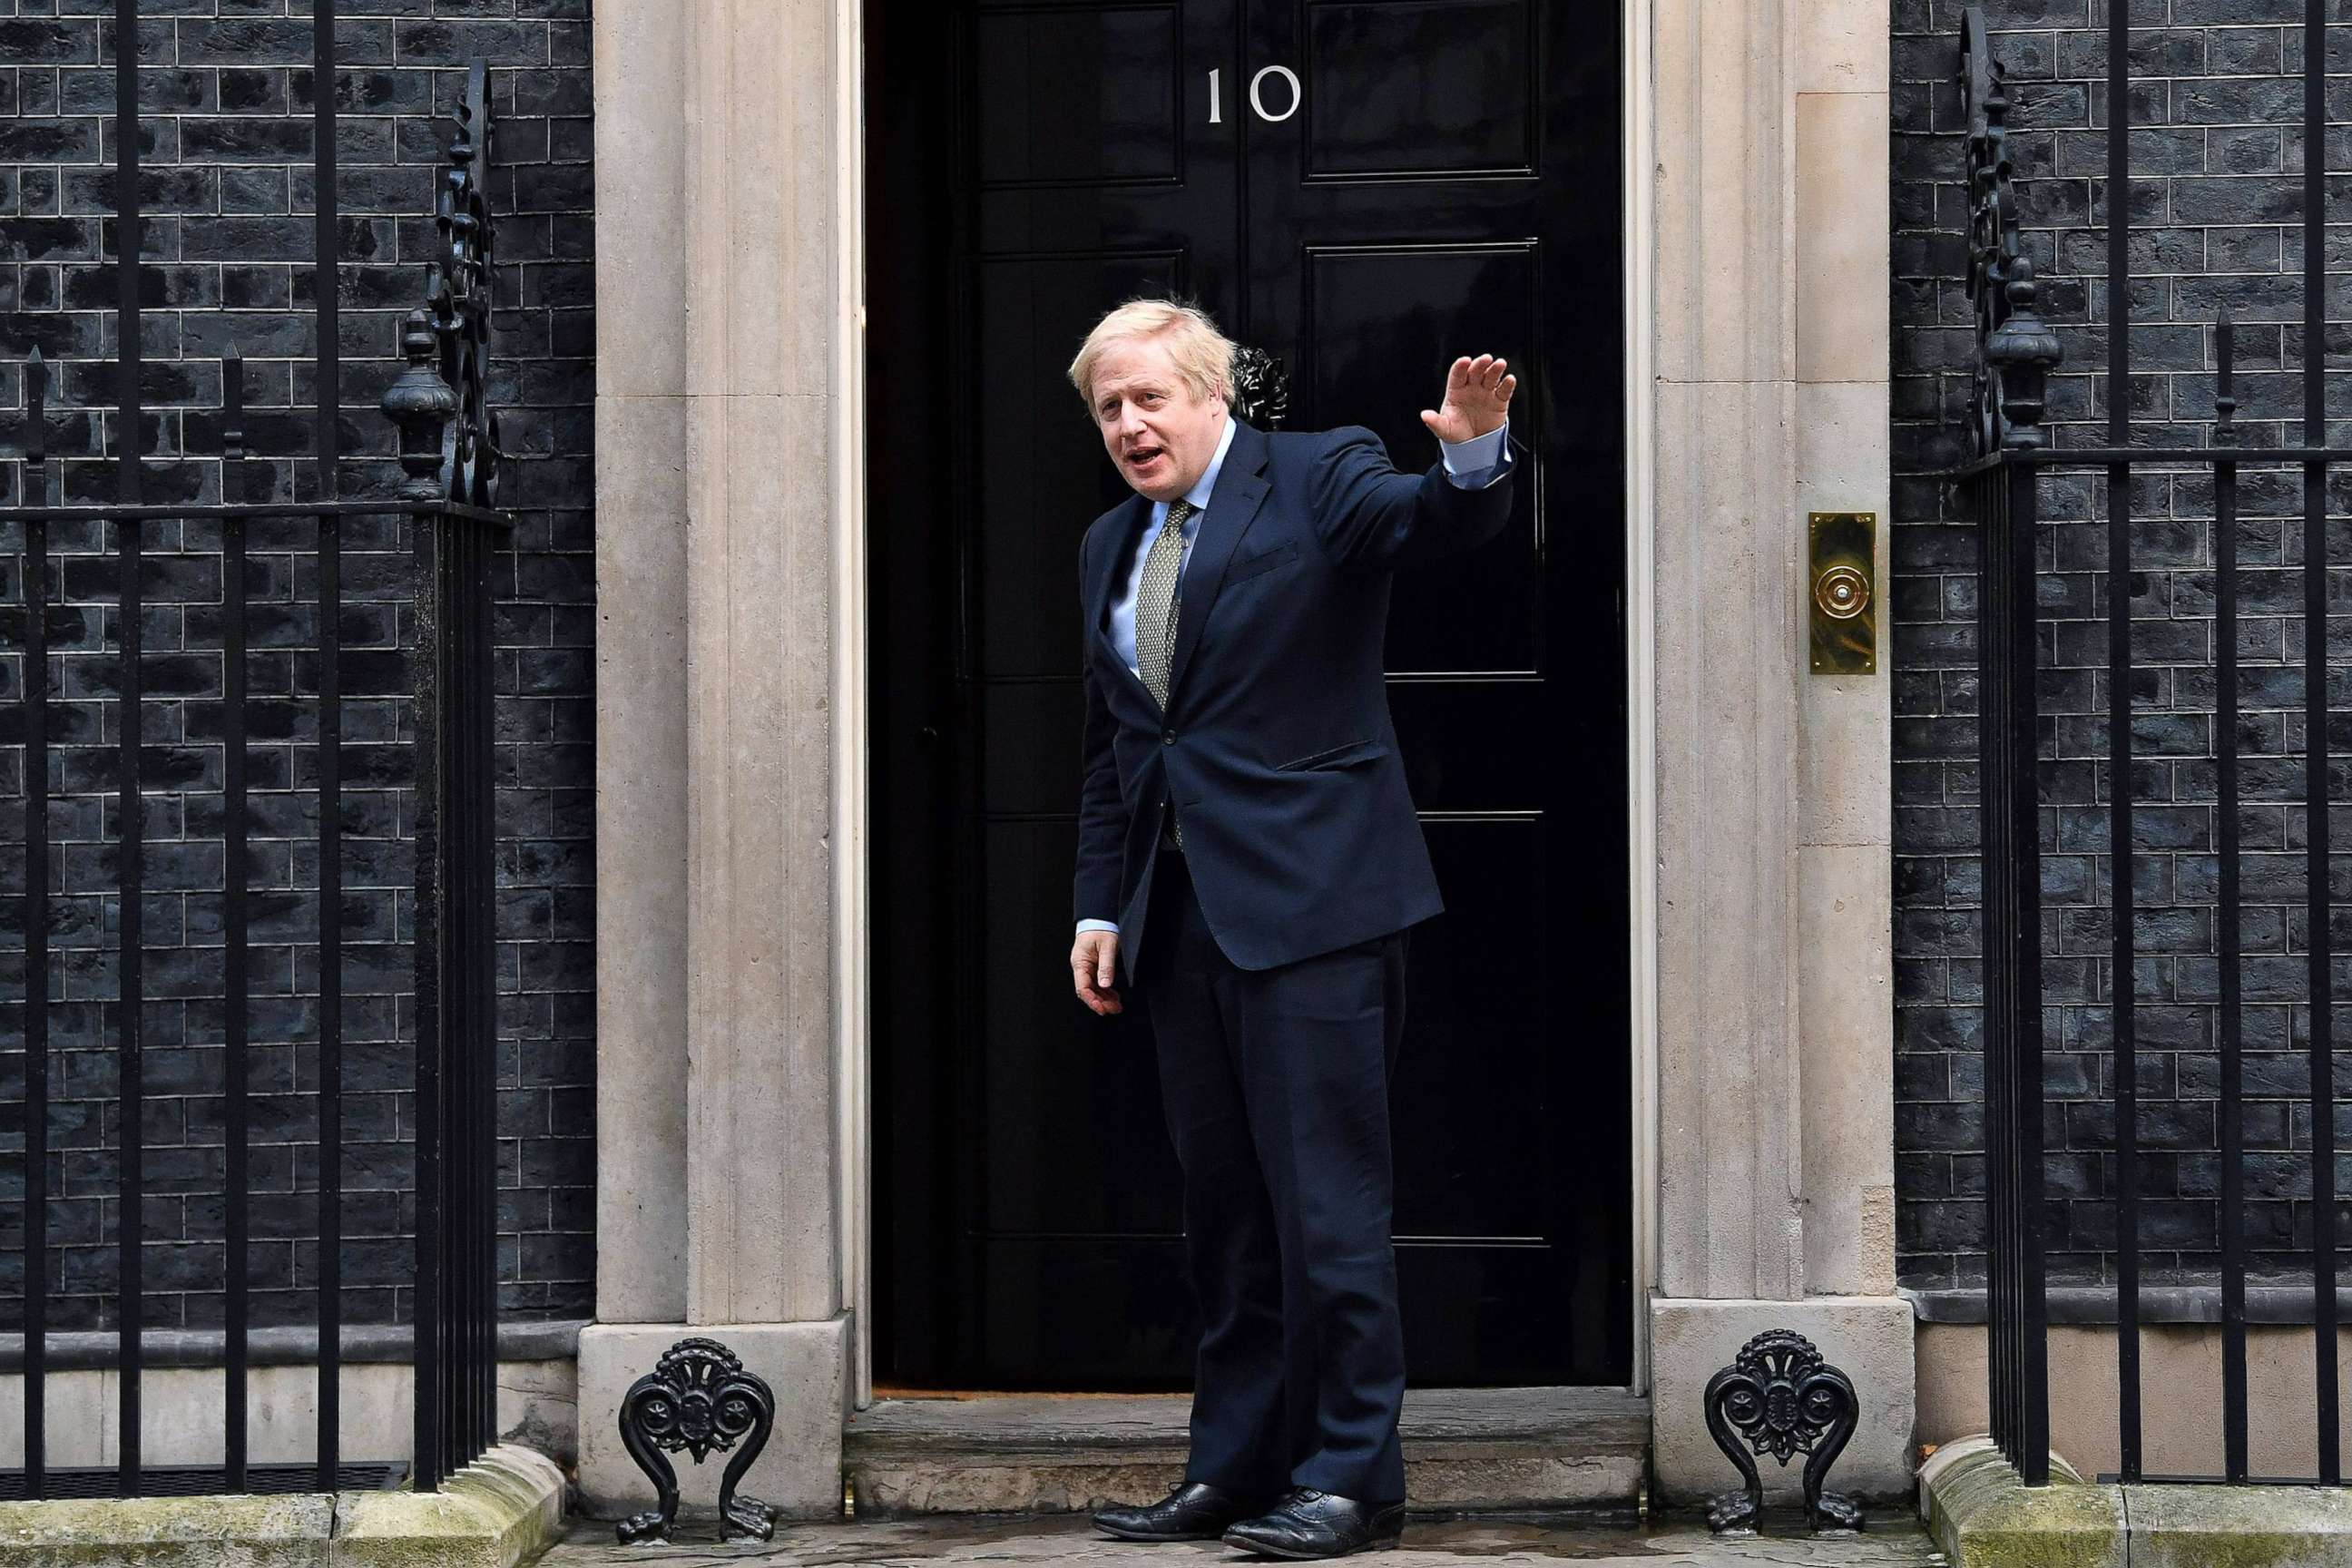 PHOTO: Britain's Prime Minister and Conservative Party leader Boris Johnson arrives at 10 Downing Street in London on Dec. 13, 2019, following an audience with Queen Elizabeth II, where she invited him to become Prime Minister and form a new government.